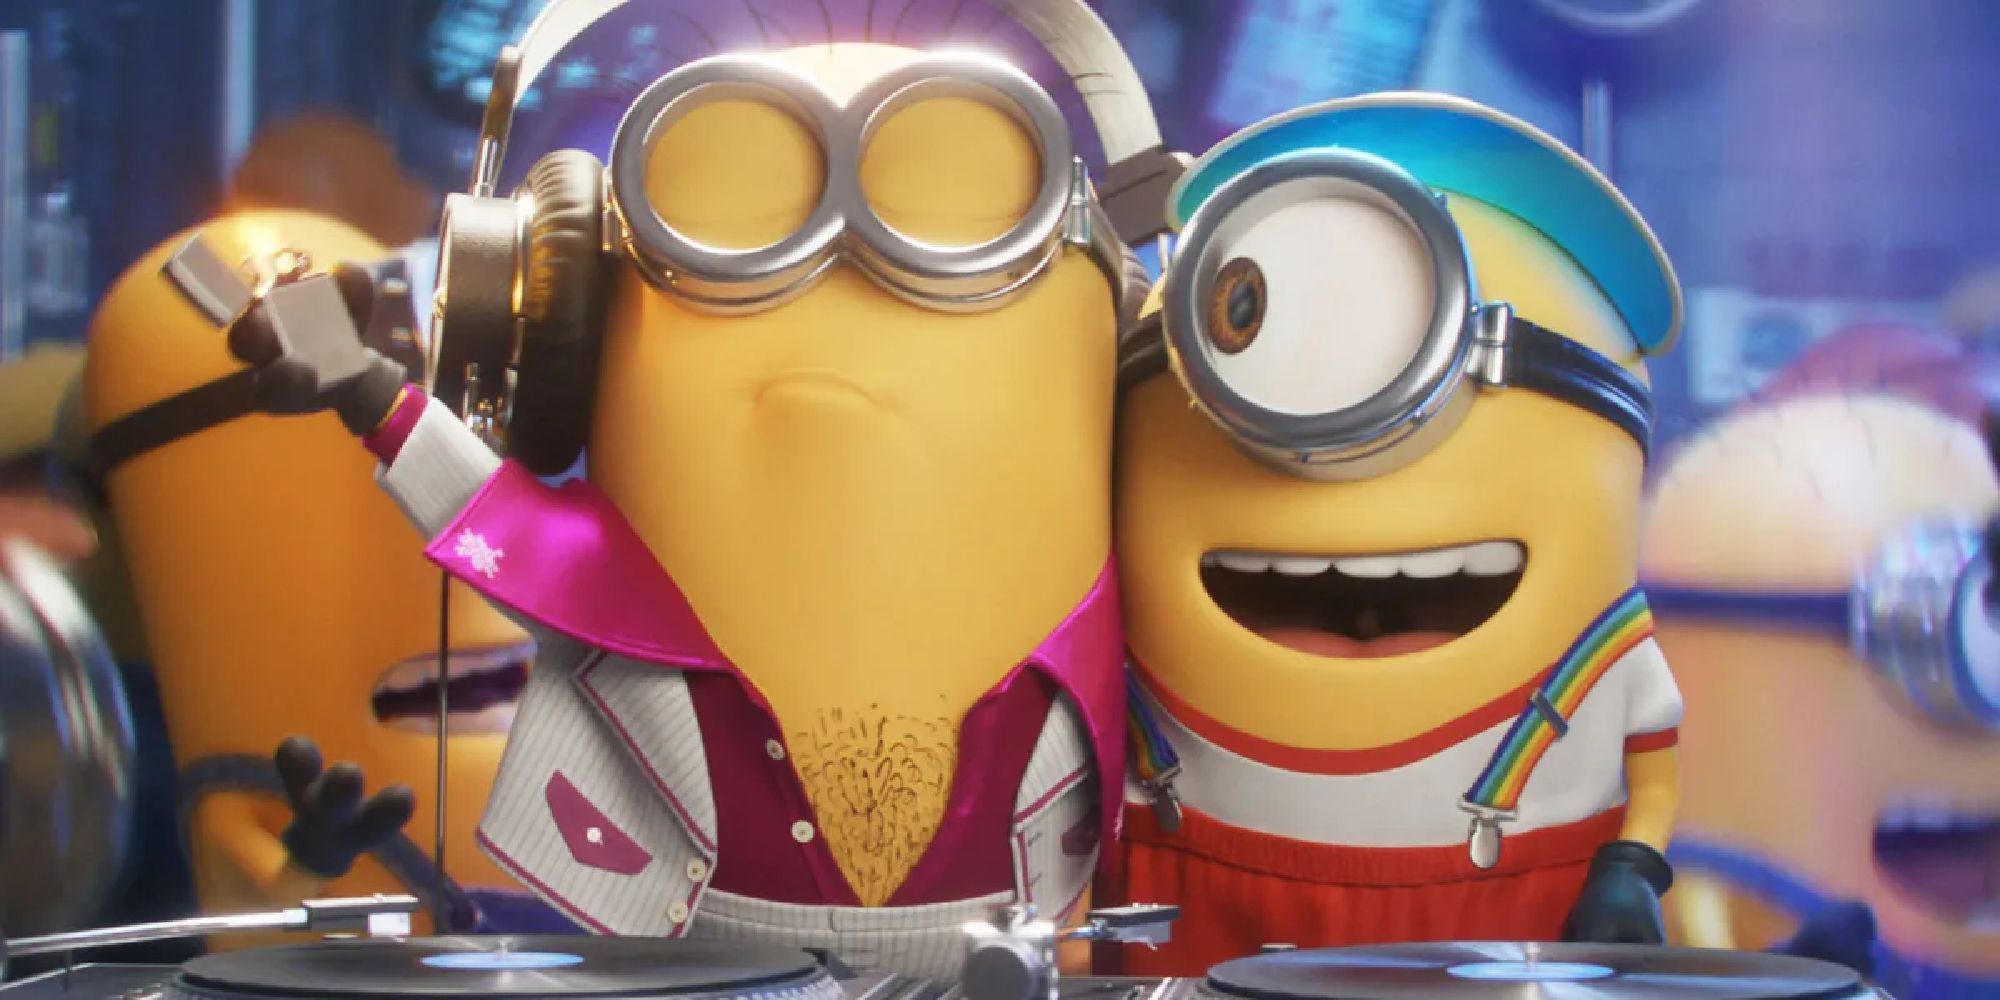 A Minion DJ with chest hair dances with a Minion in suspenders